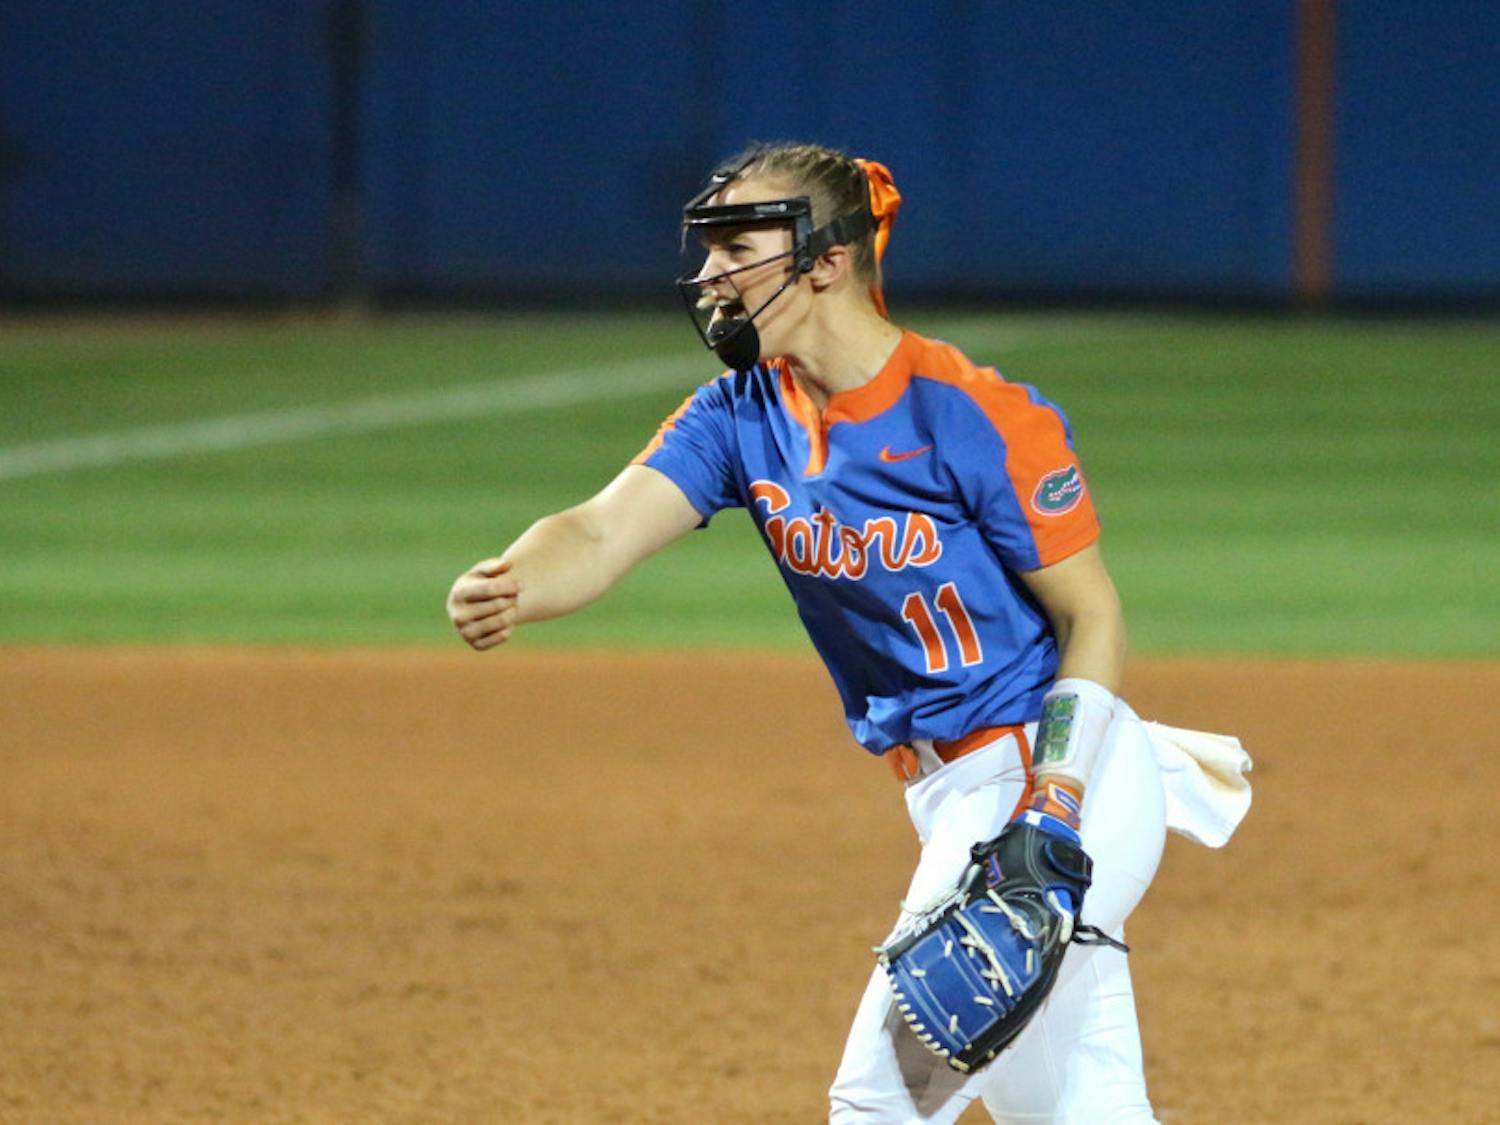 Junior Kelly Barnhill pitched 2+ innings and allowed three runs (one earned) in Florida's worst loss since 2011. 